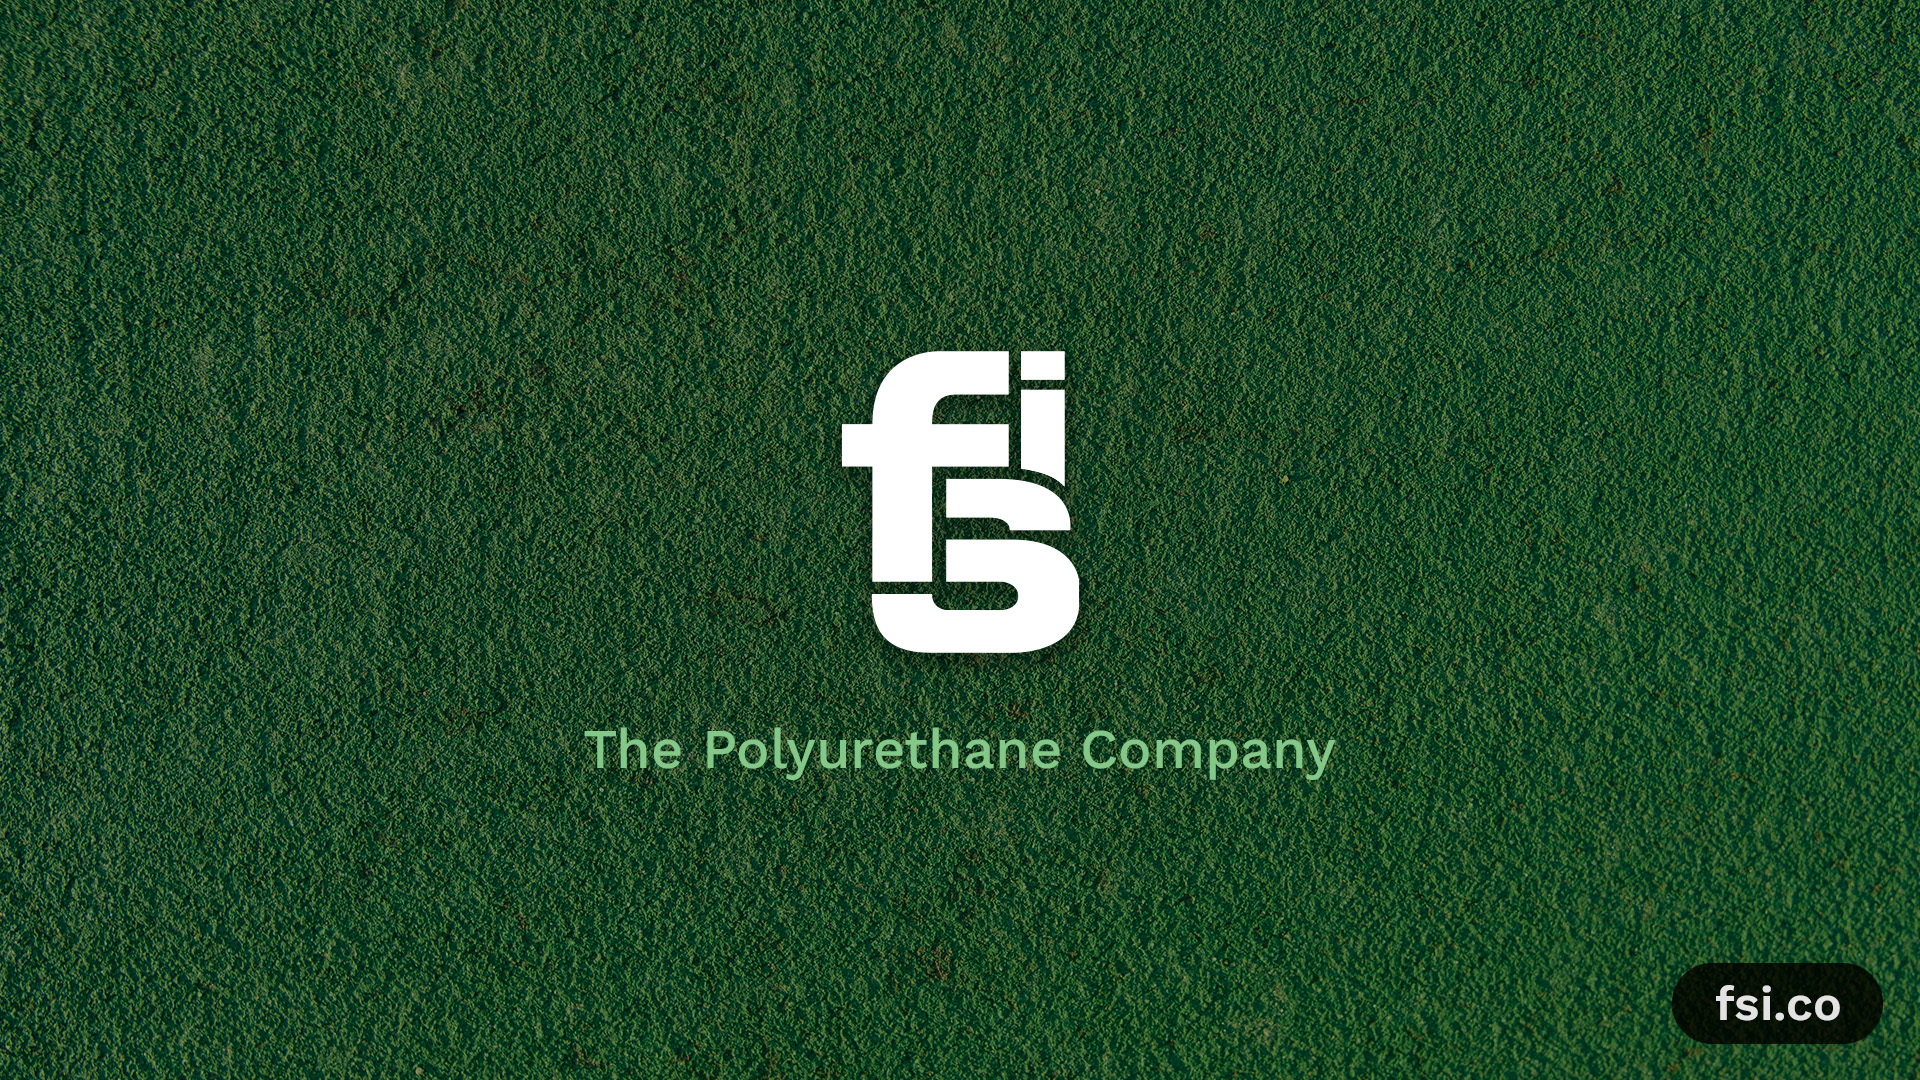 Leading Global Provider of Polyurethane Systems Rebrands from Foam Supplies, Inc to FSI